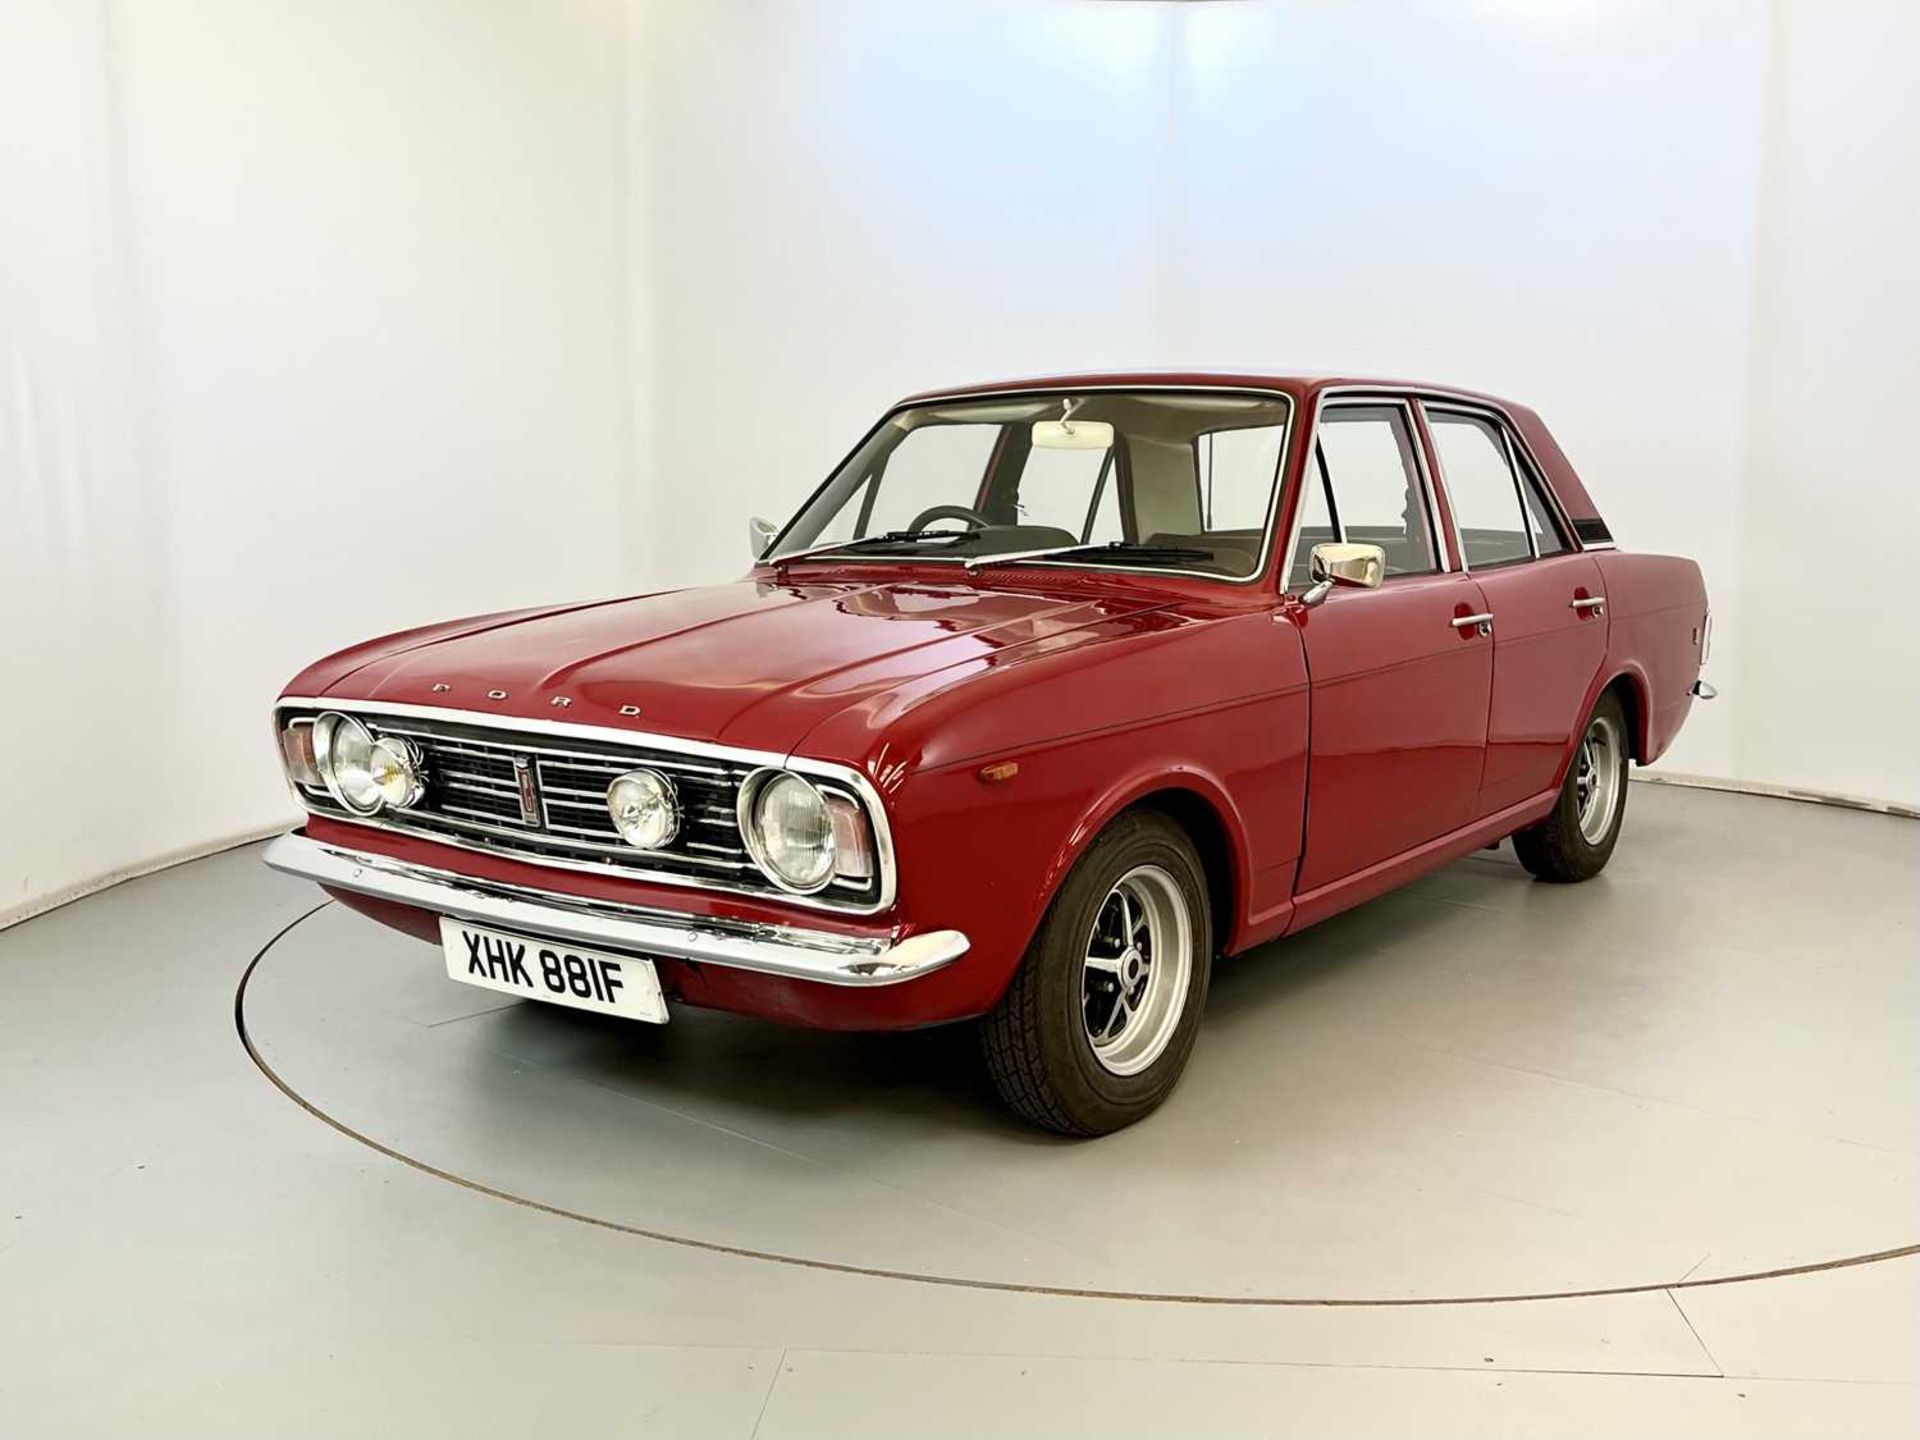 1967 Ford Cortina 1600GT - Image 3 of 37